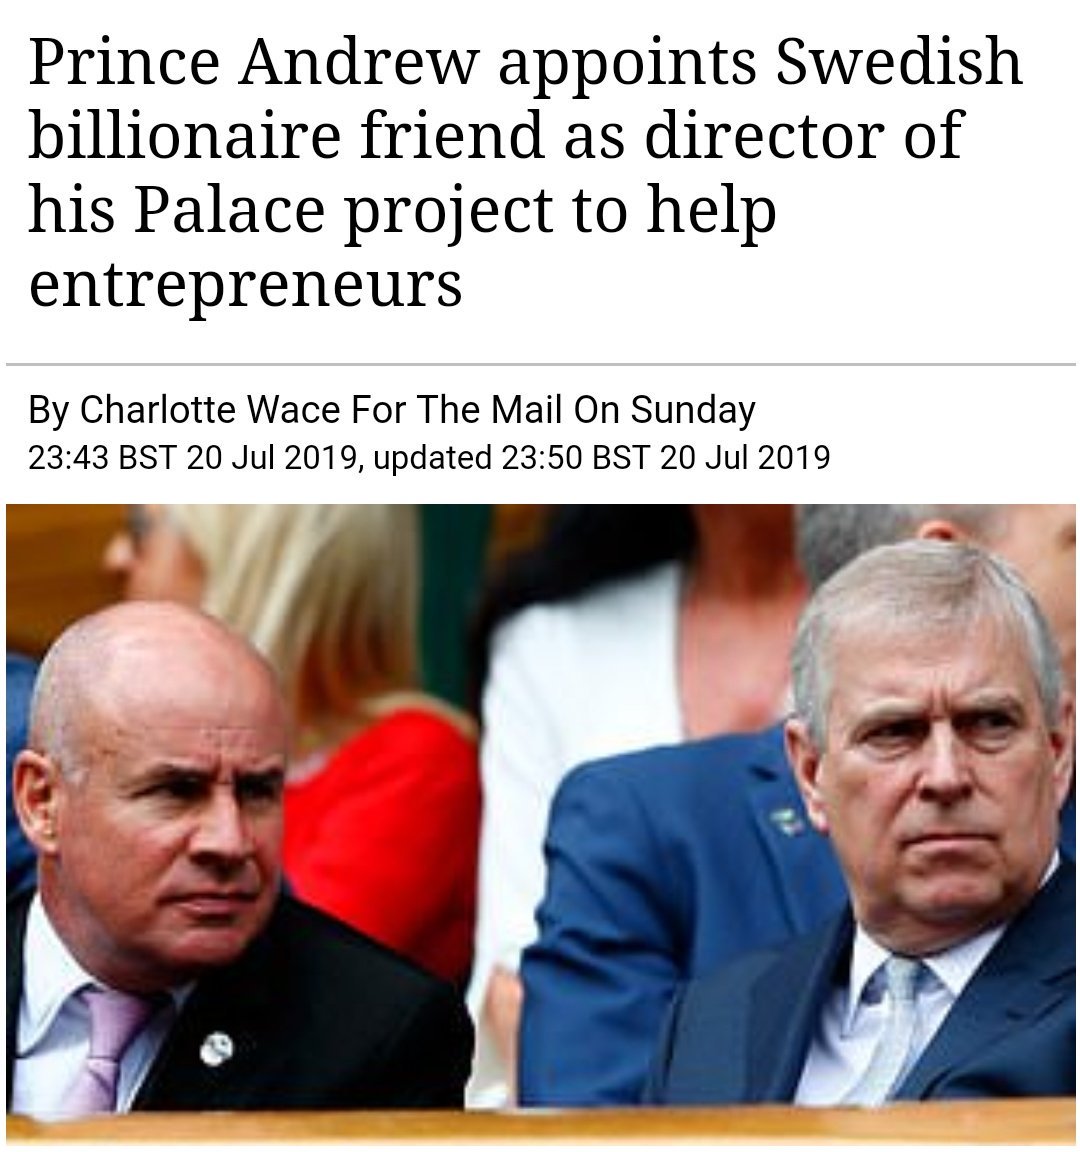 Johan Eilasch, CEO of HEAD sporting goods, was adviser to Boris Johnson when London mayor, William Hague, Iain Duncan Smith and Michael Howard. Like Boris Johnson, he has come out strongly in defence of Prince Andrew. https://www.dailymail.co.uk/news/article-7268677/Prince-Andrew-appoints-Swedish-billionaire-friend-director-Palace-project.html